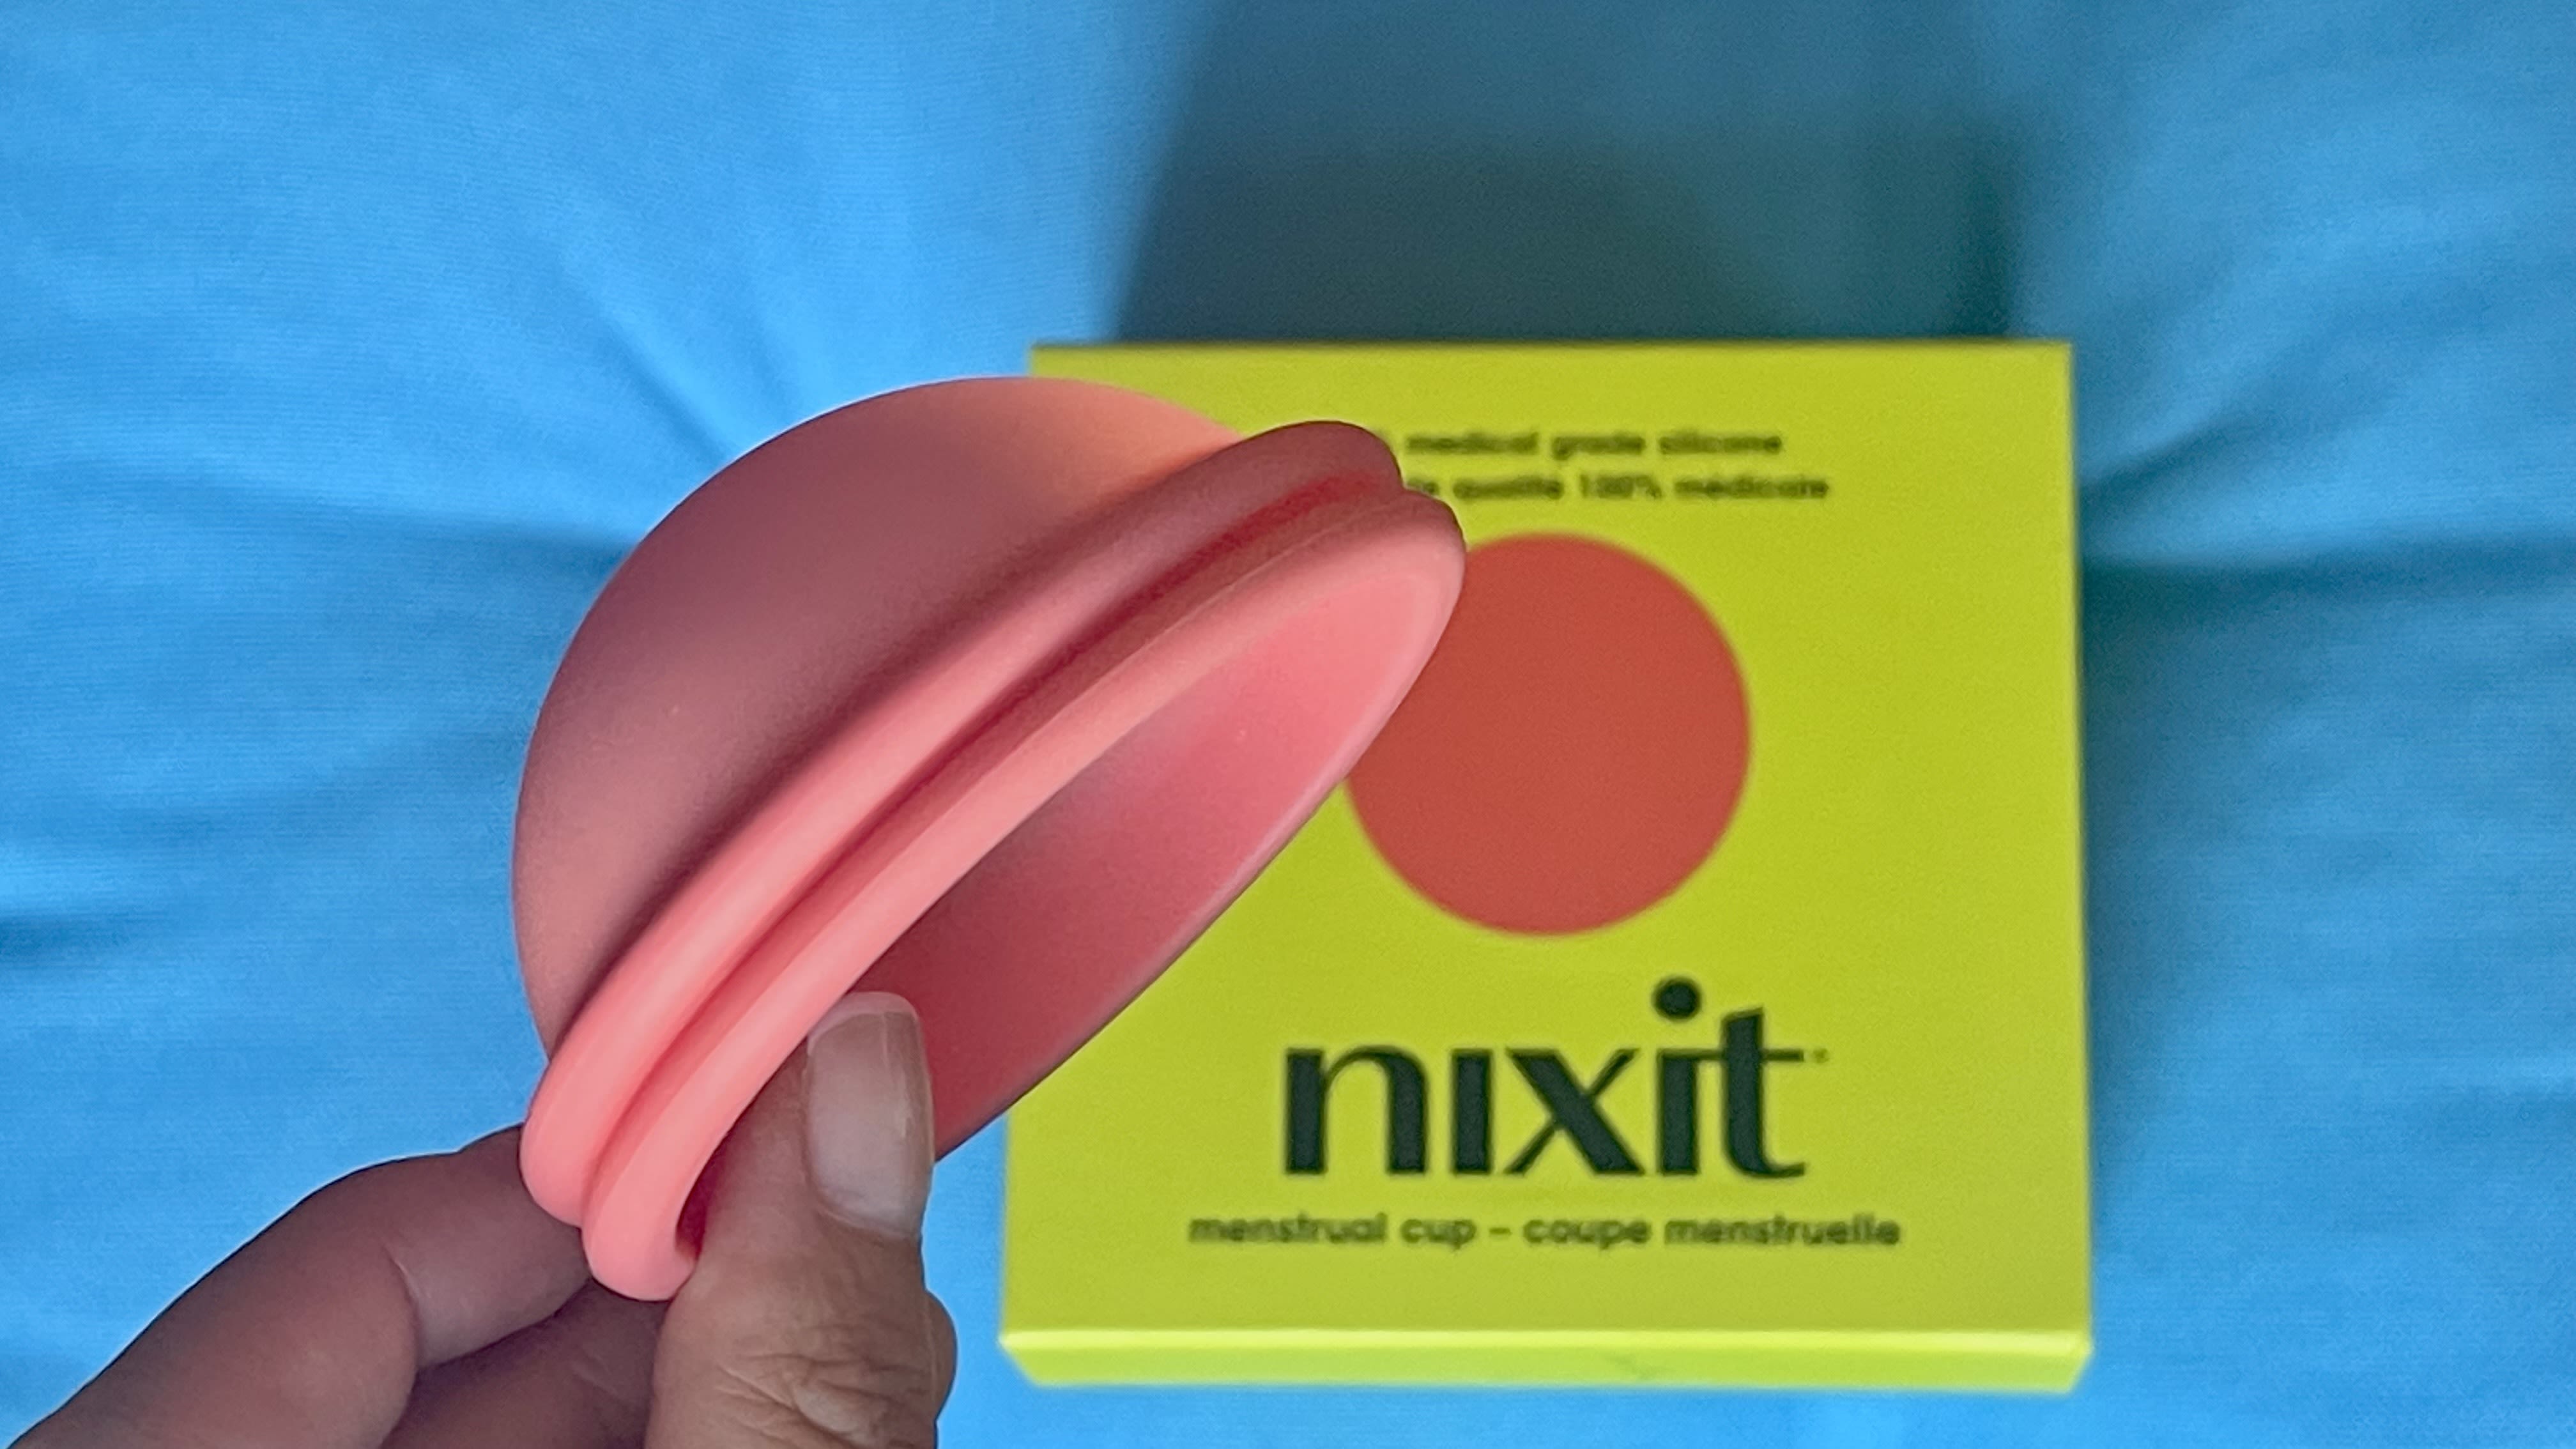 Are you ready for a new period routine? #nixit #menstrualcups